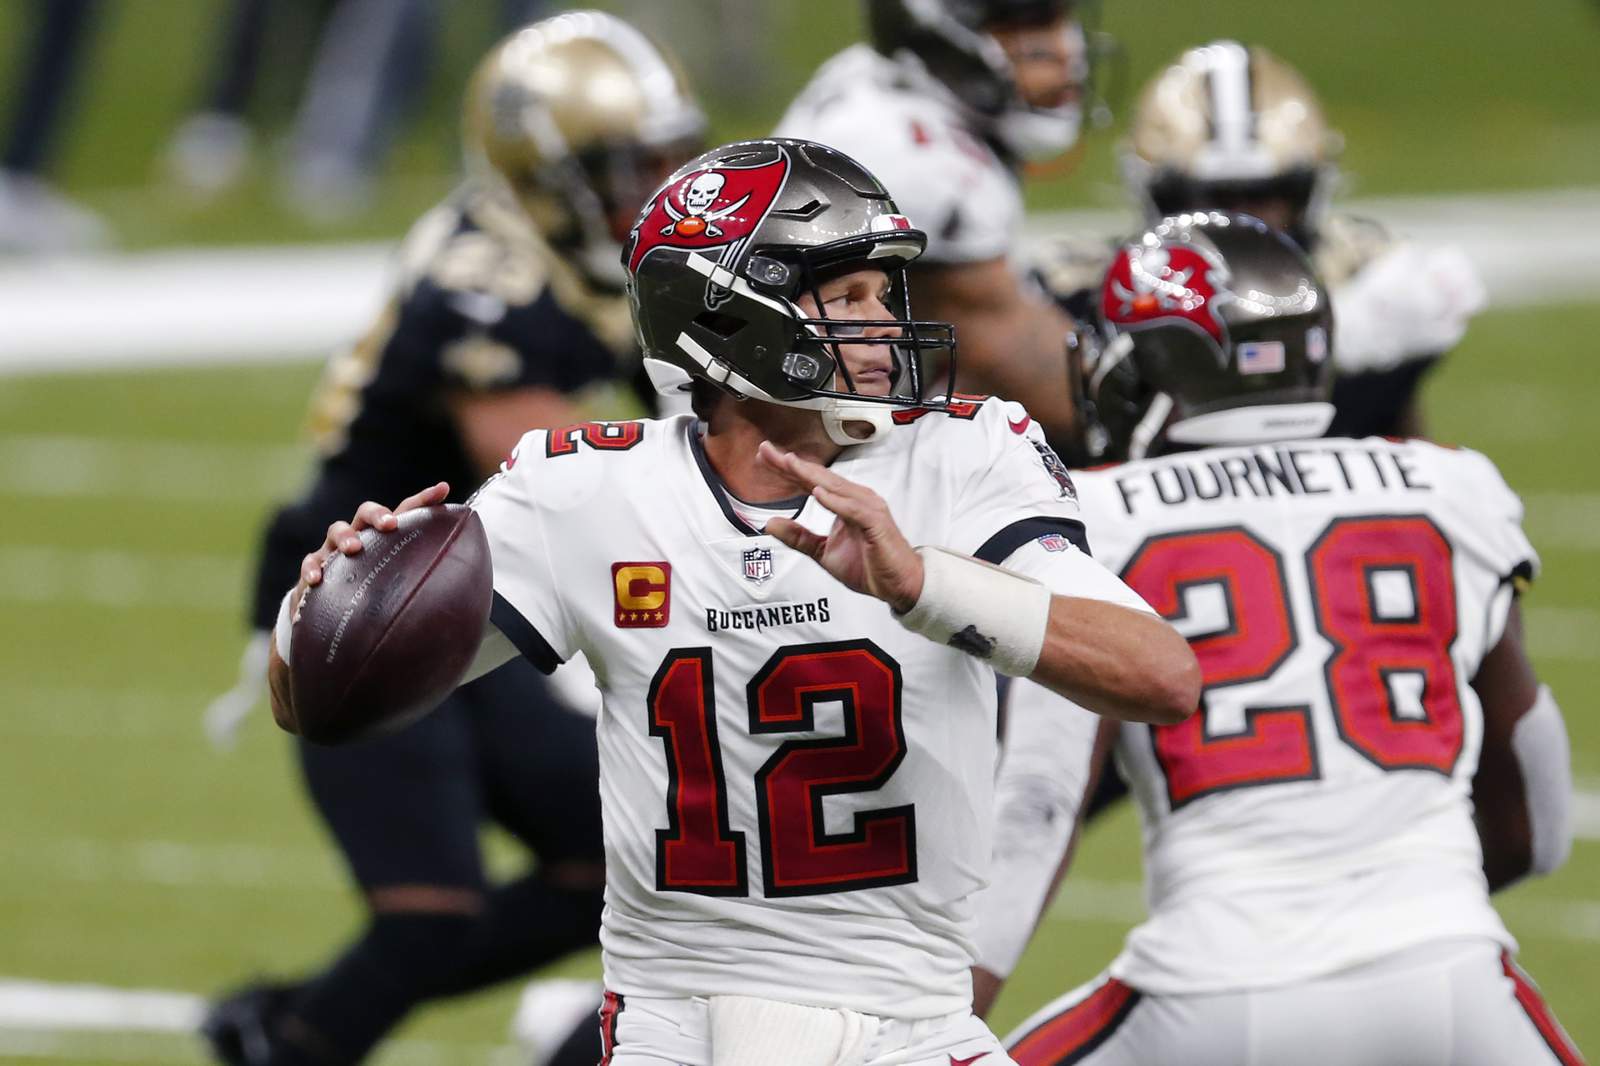 ODDS, HISTORY, STATS: Tom Brady, Bucs aim to rebound against NFC South rival Panthers